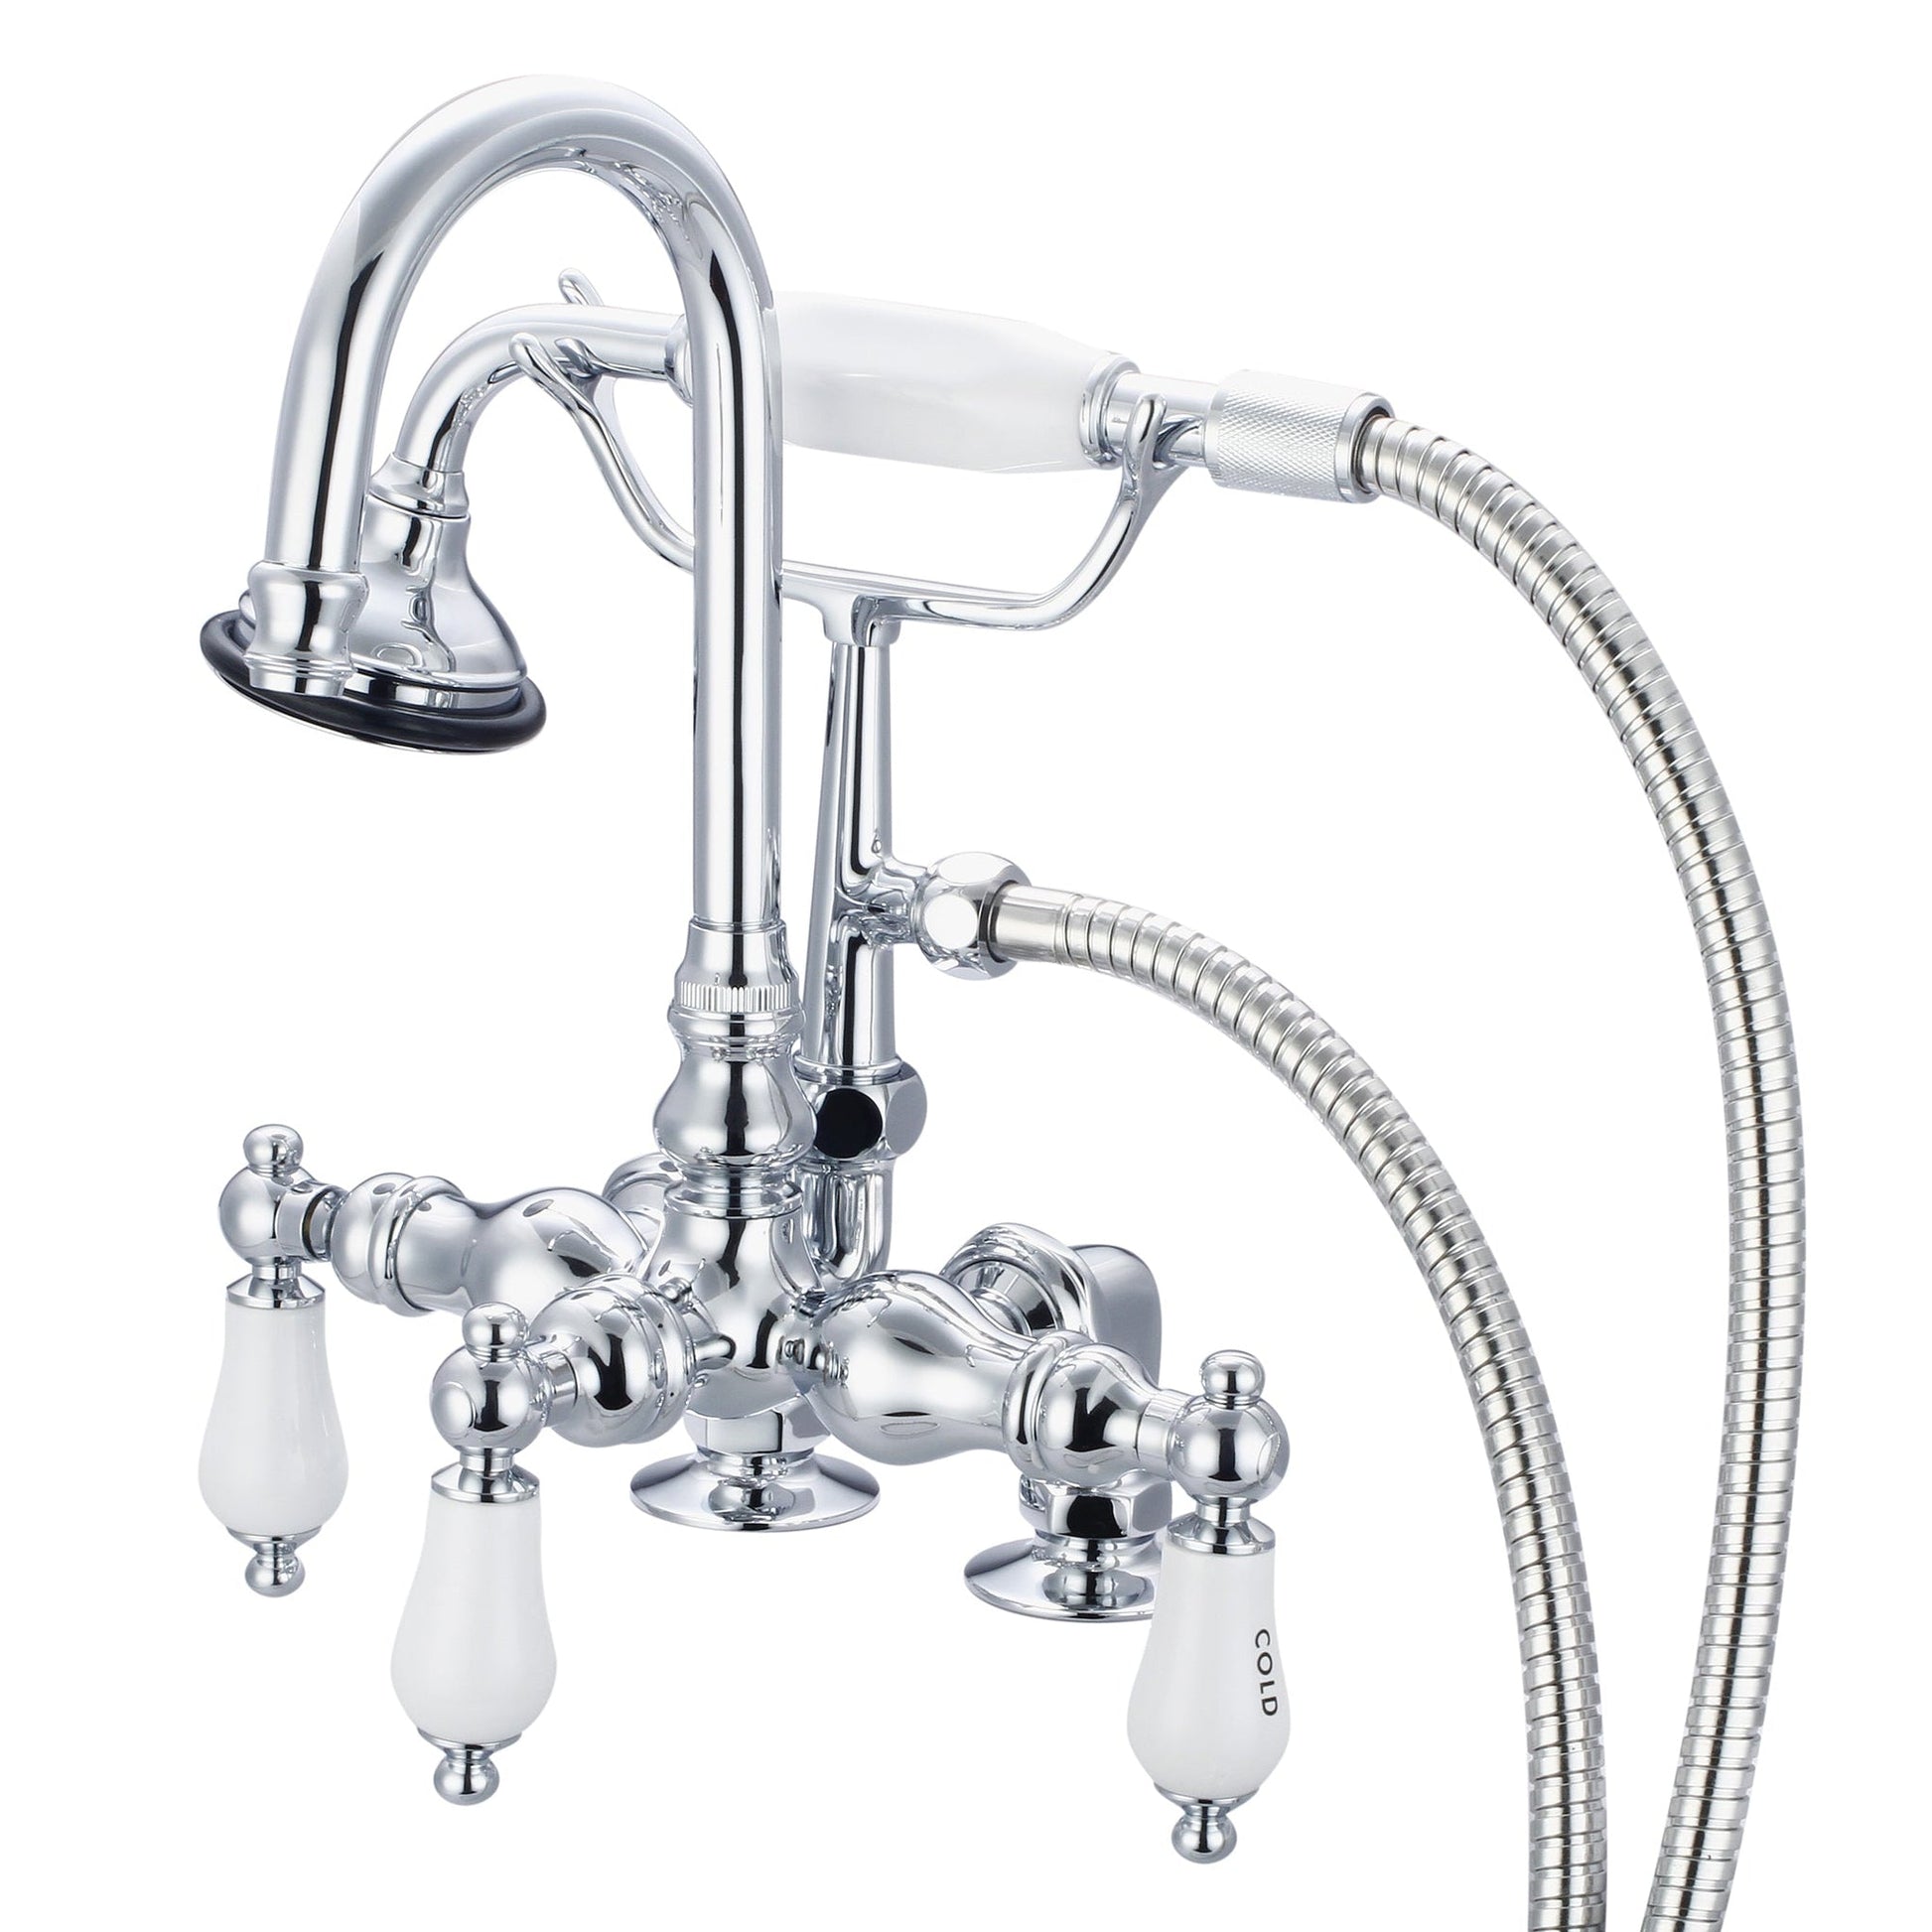 Water Creation Vintage Classic Center Deck Mount Tub F6-0013 9.25" Silver Solid Brass Faucet With Gooseneck Spout, 2-Inch Risers And Handheld Shower And Porcelain Lever Handles, Hot And Cold Labels Included